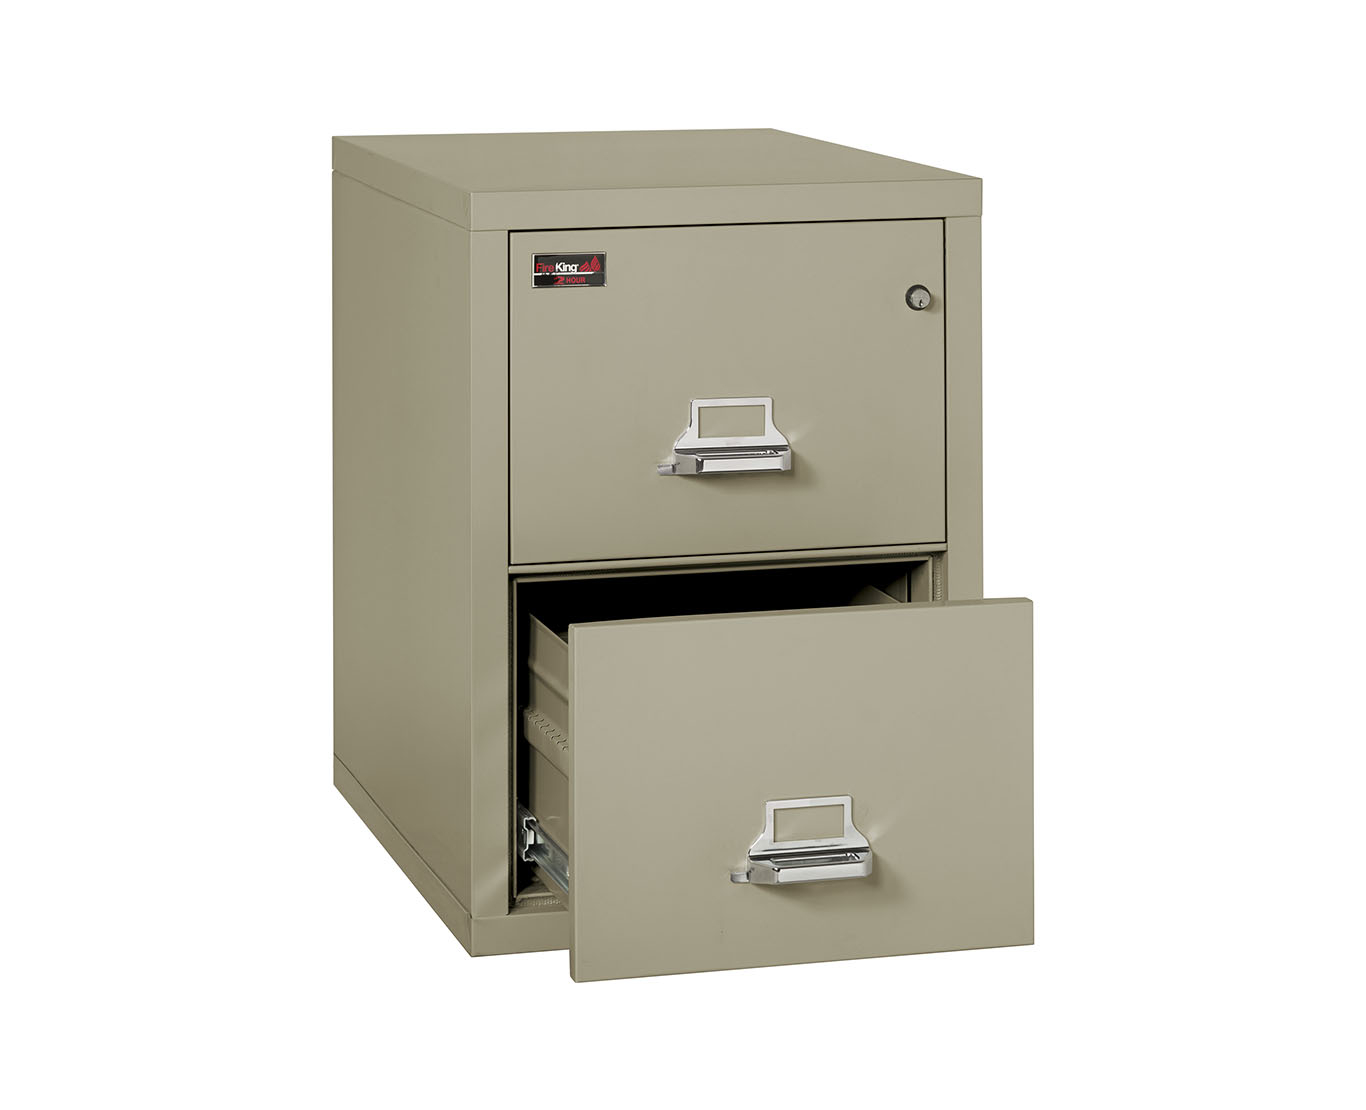 Fireproof File Cabinets 2 Hour Rated Fireking within proportions 1366 X 1110